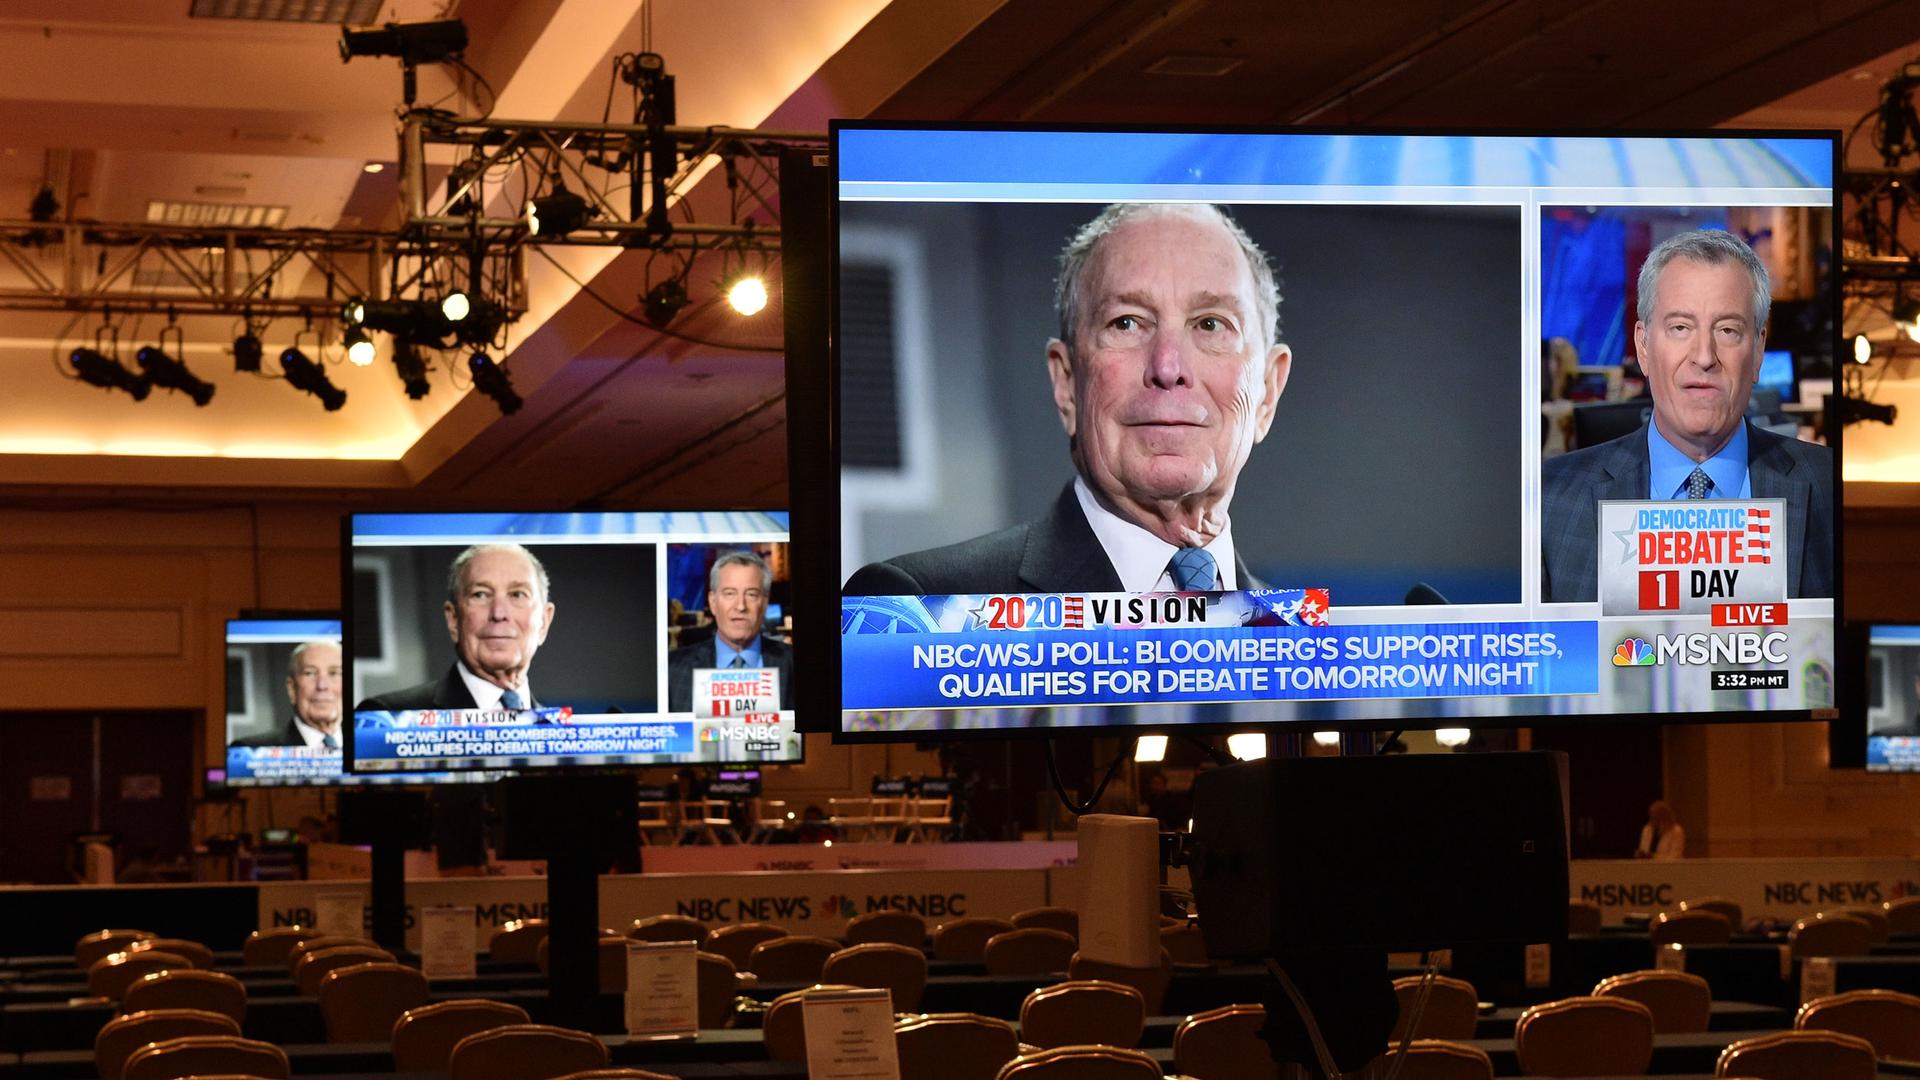 An image of the face of Michael Bloomberg is shown on a large video monitor in an auditorium with empty seats.